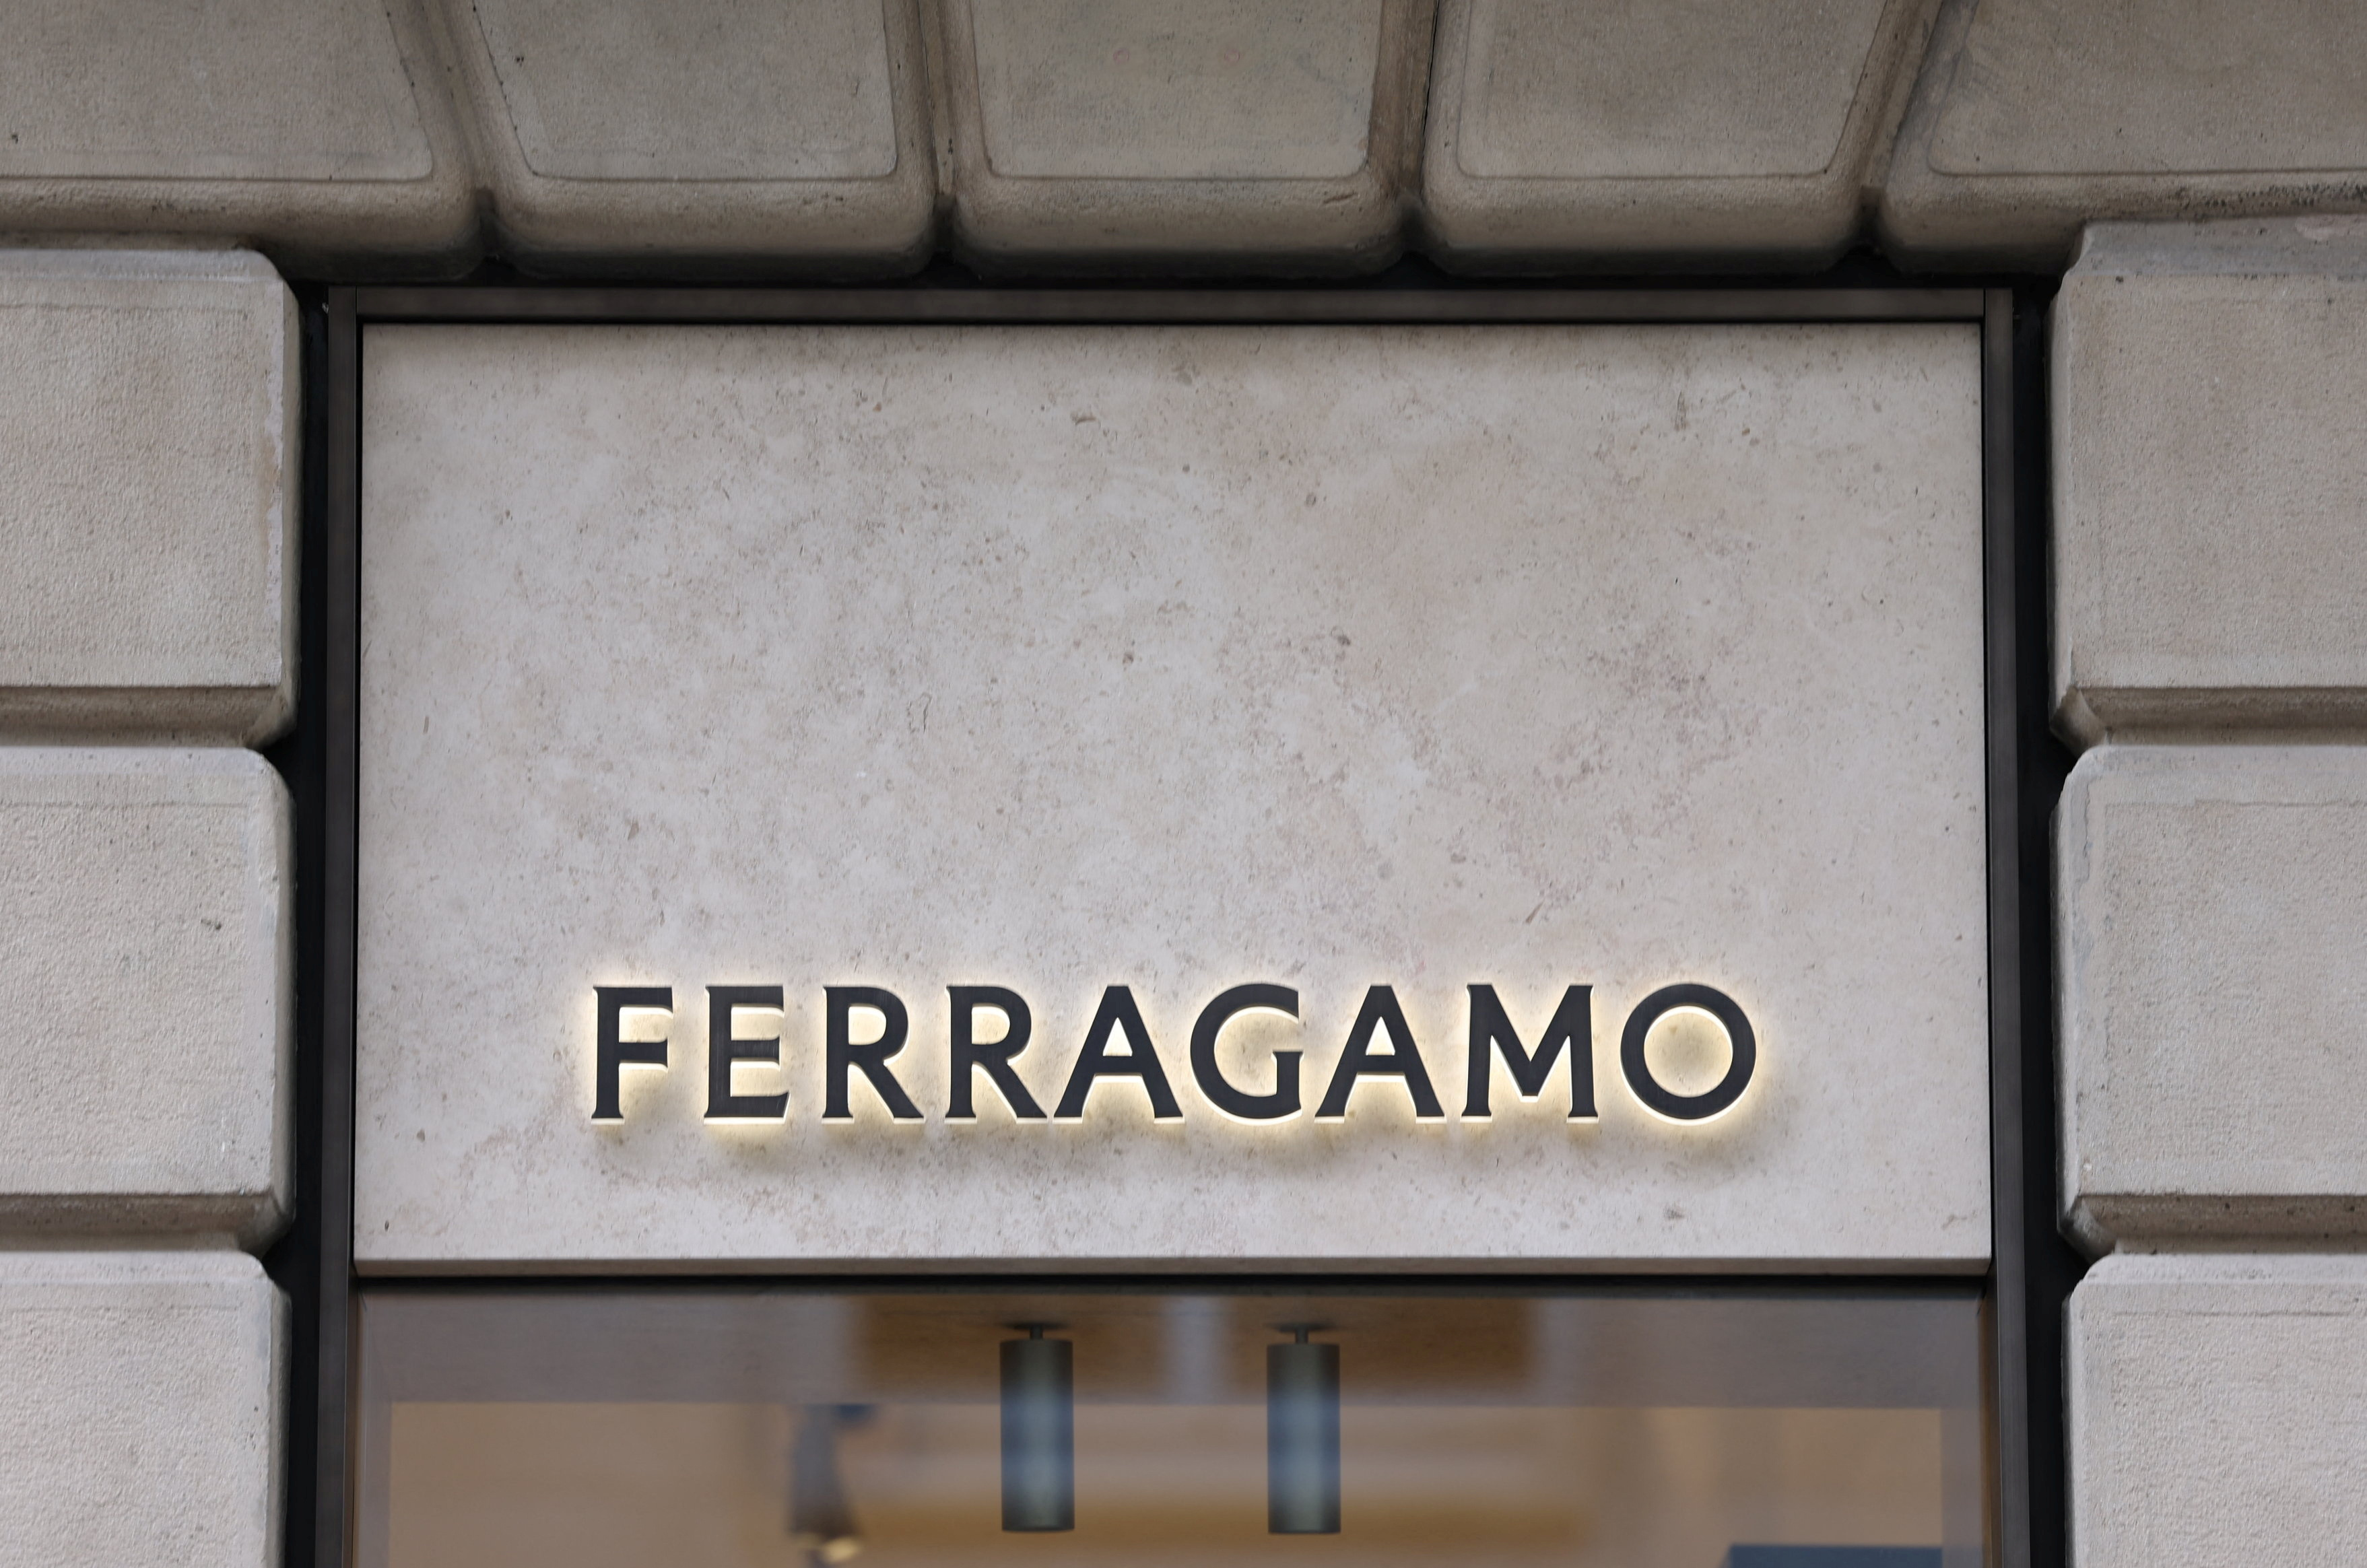 Ferragamo sales improve in February after weak start to year | Reuters